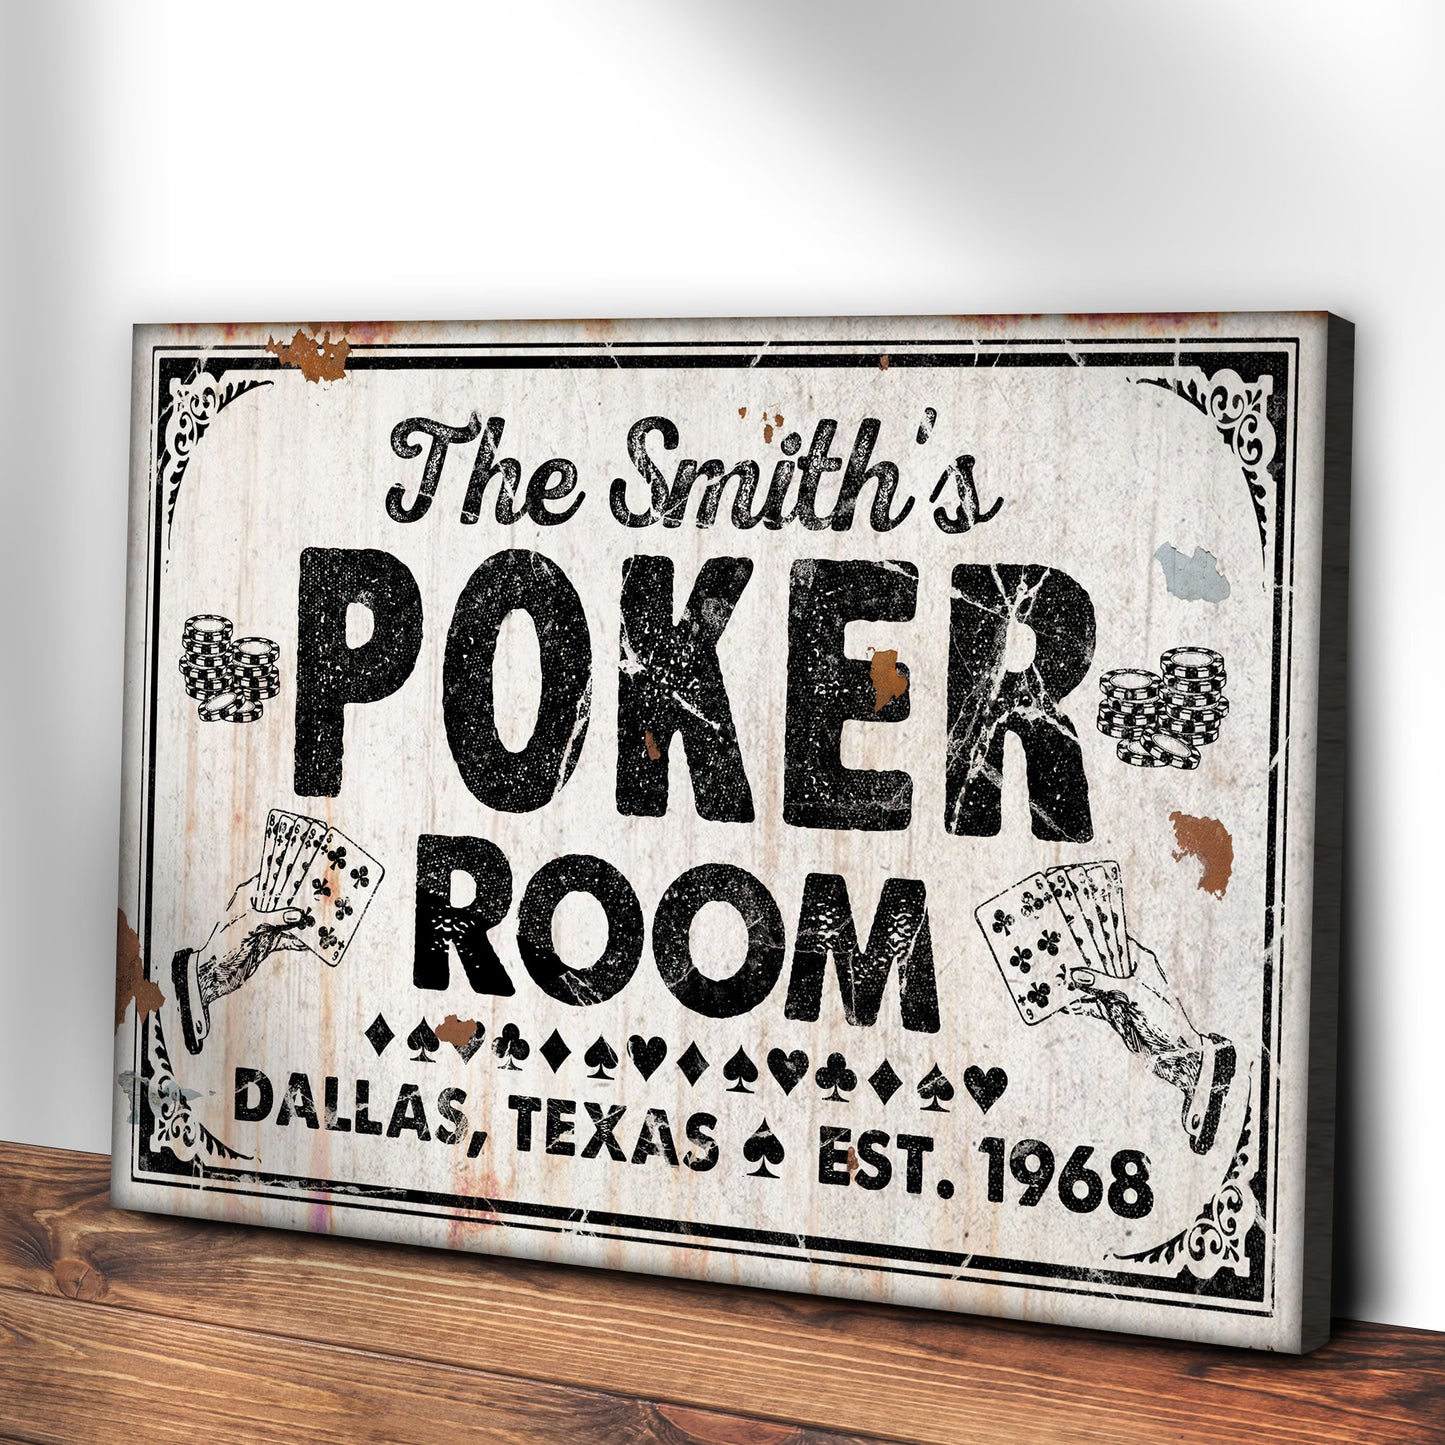 Rustic Poker Room Sign II - Image by Tailored Canvases